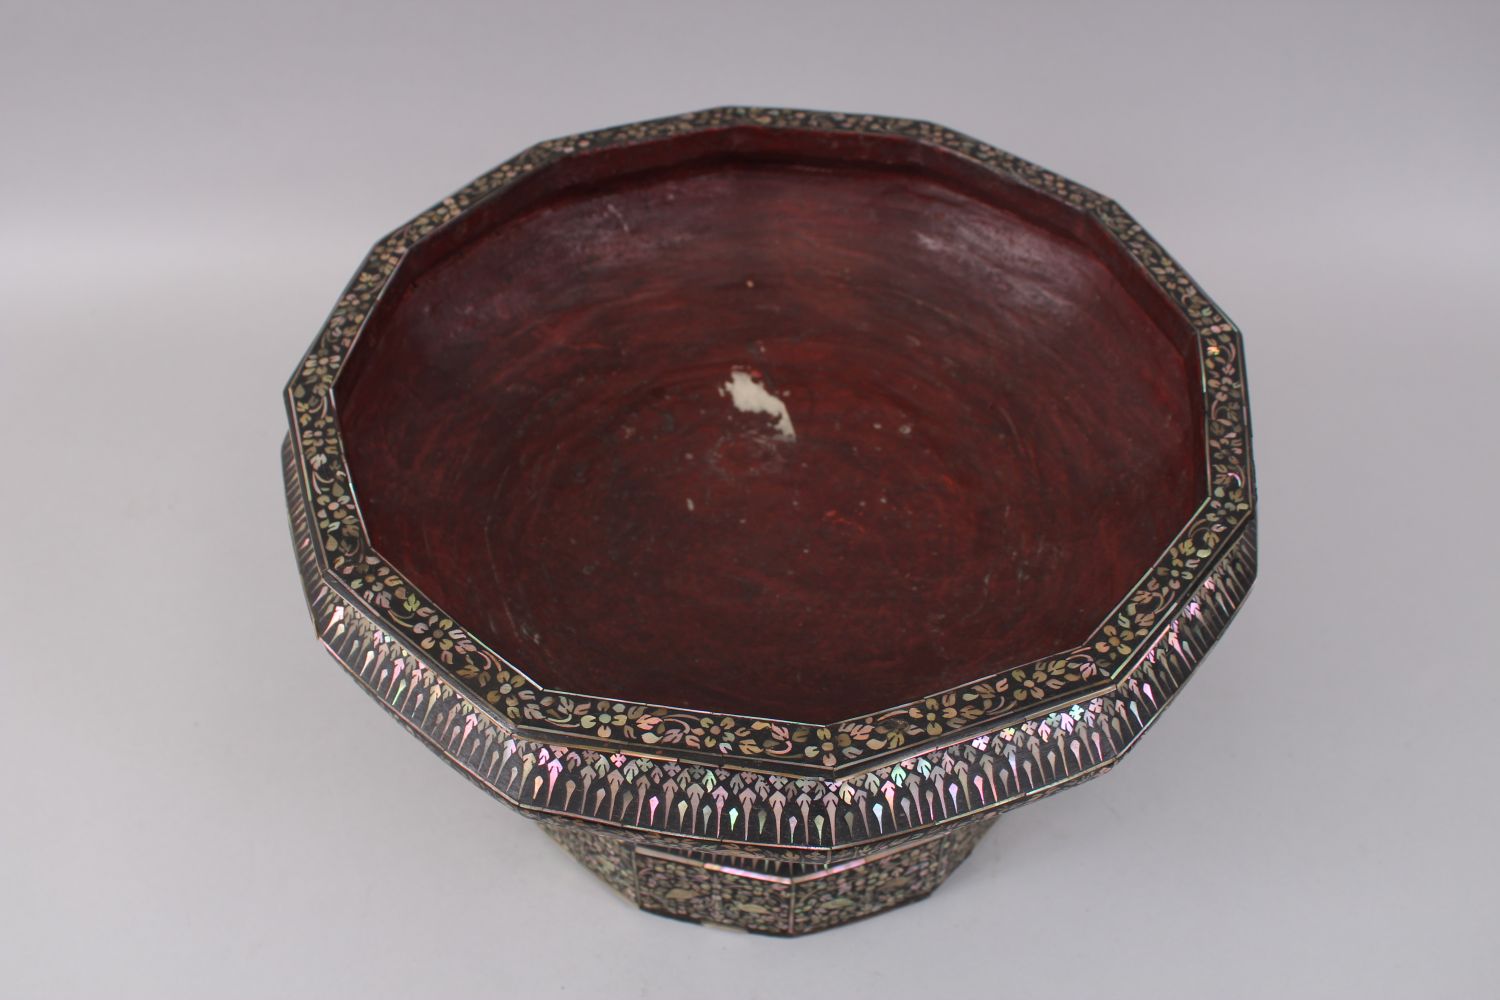 A LARGE 19TH CENTURY THAI MOTHER OF PEARL INLAID LACQUERED TWELVE-SIDED PEDESTAL BOWL, 36cm diameter - Image 3 of 7